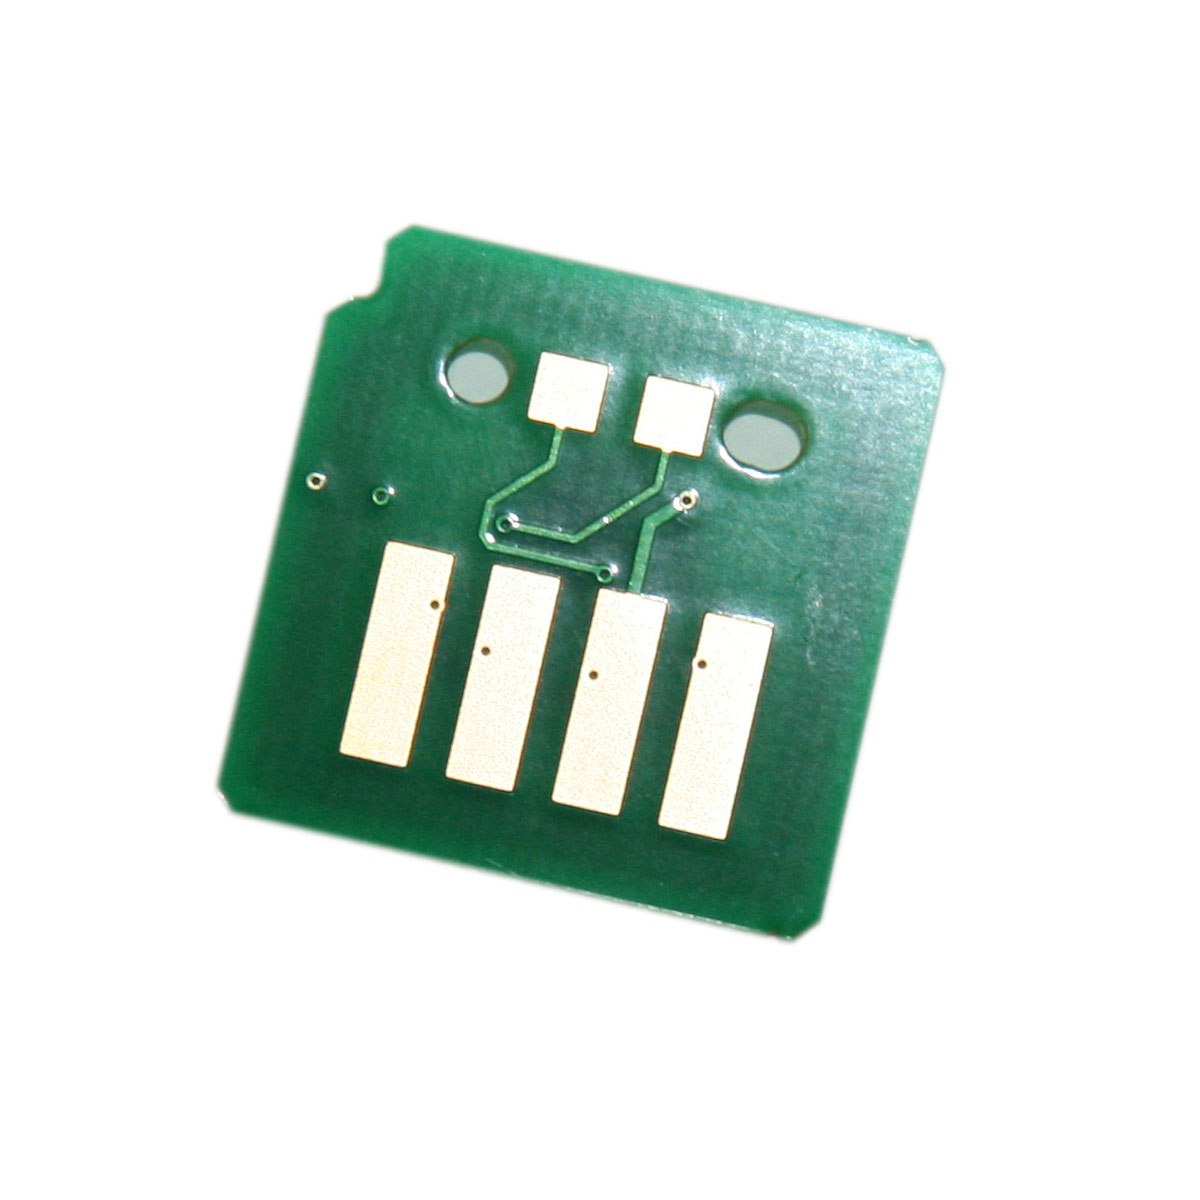 Counter chip for Drum Module Xerox WorkCentre 7525